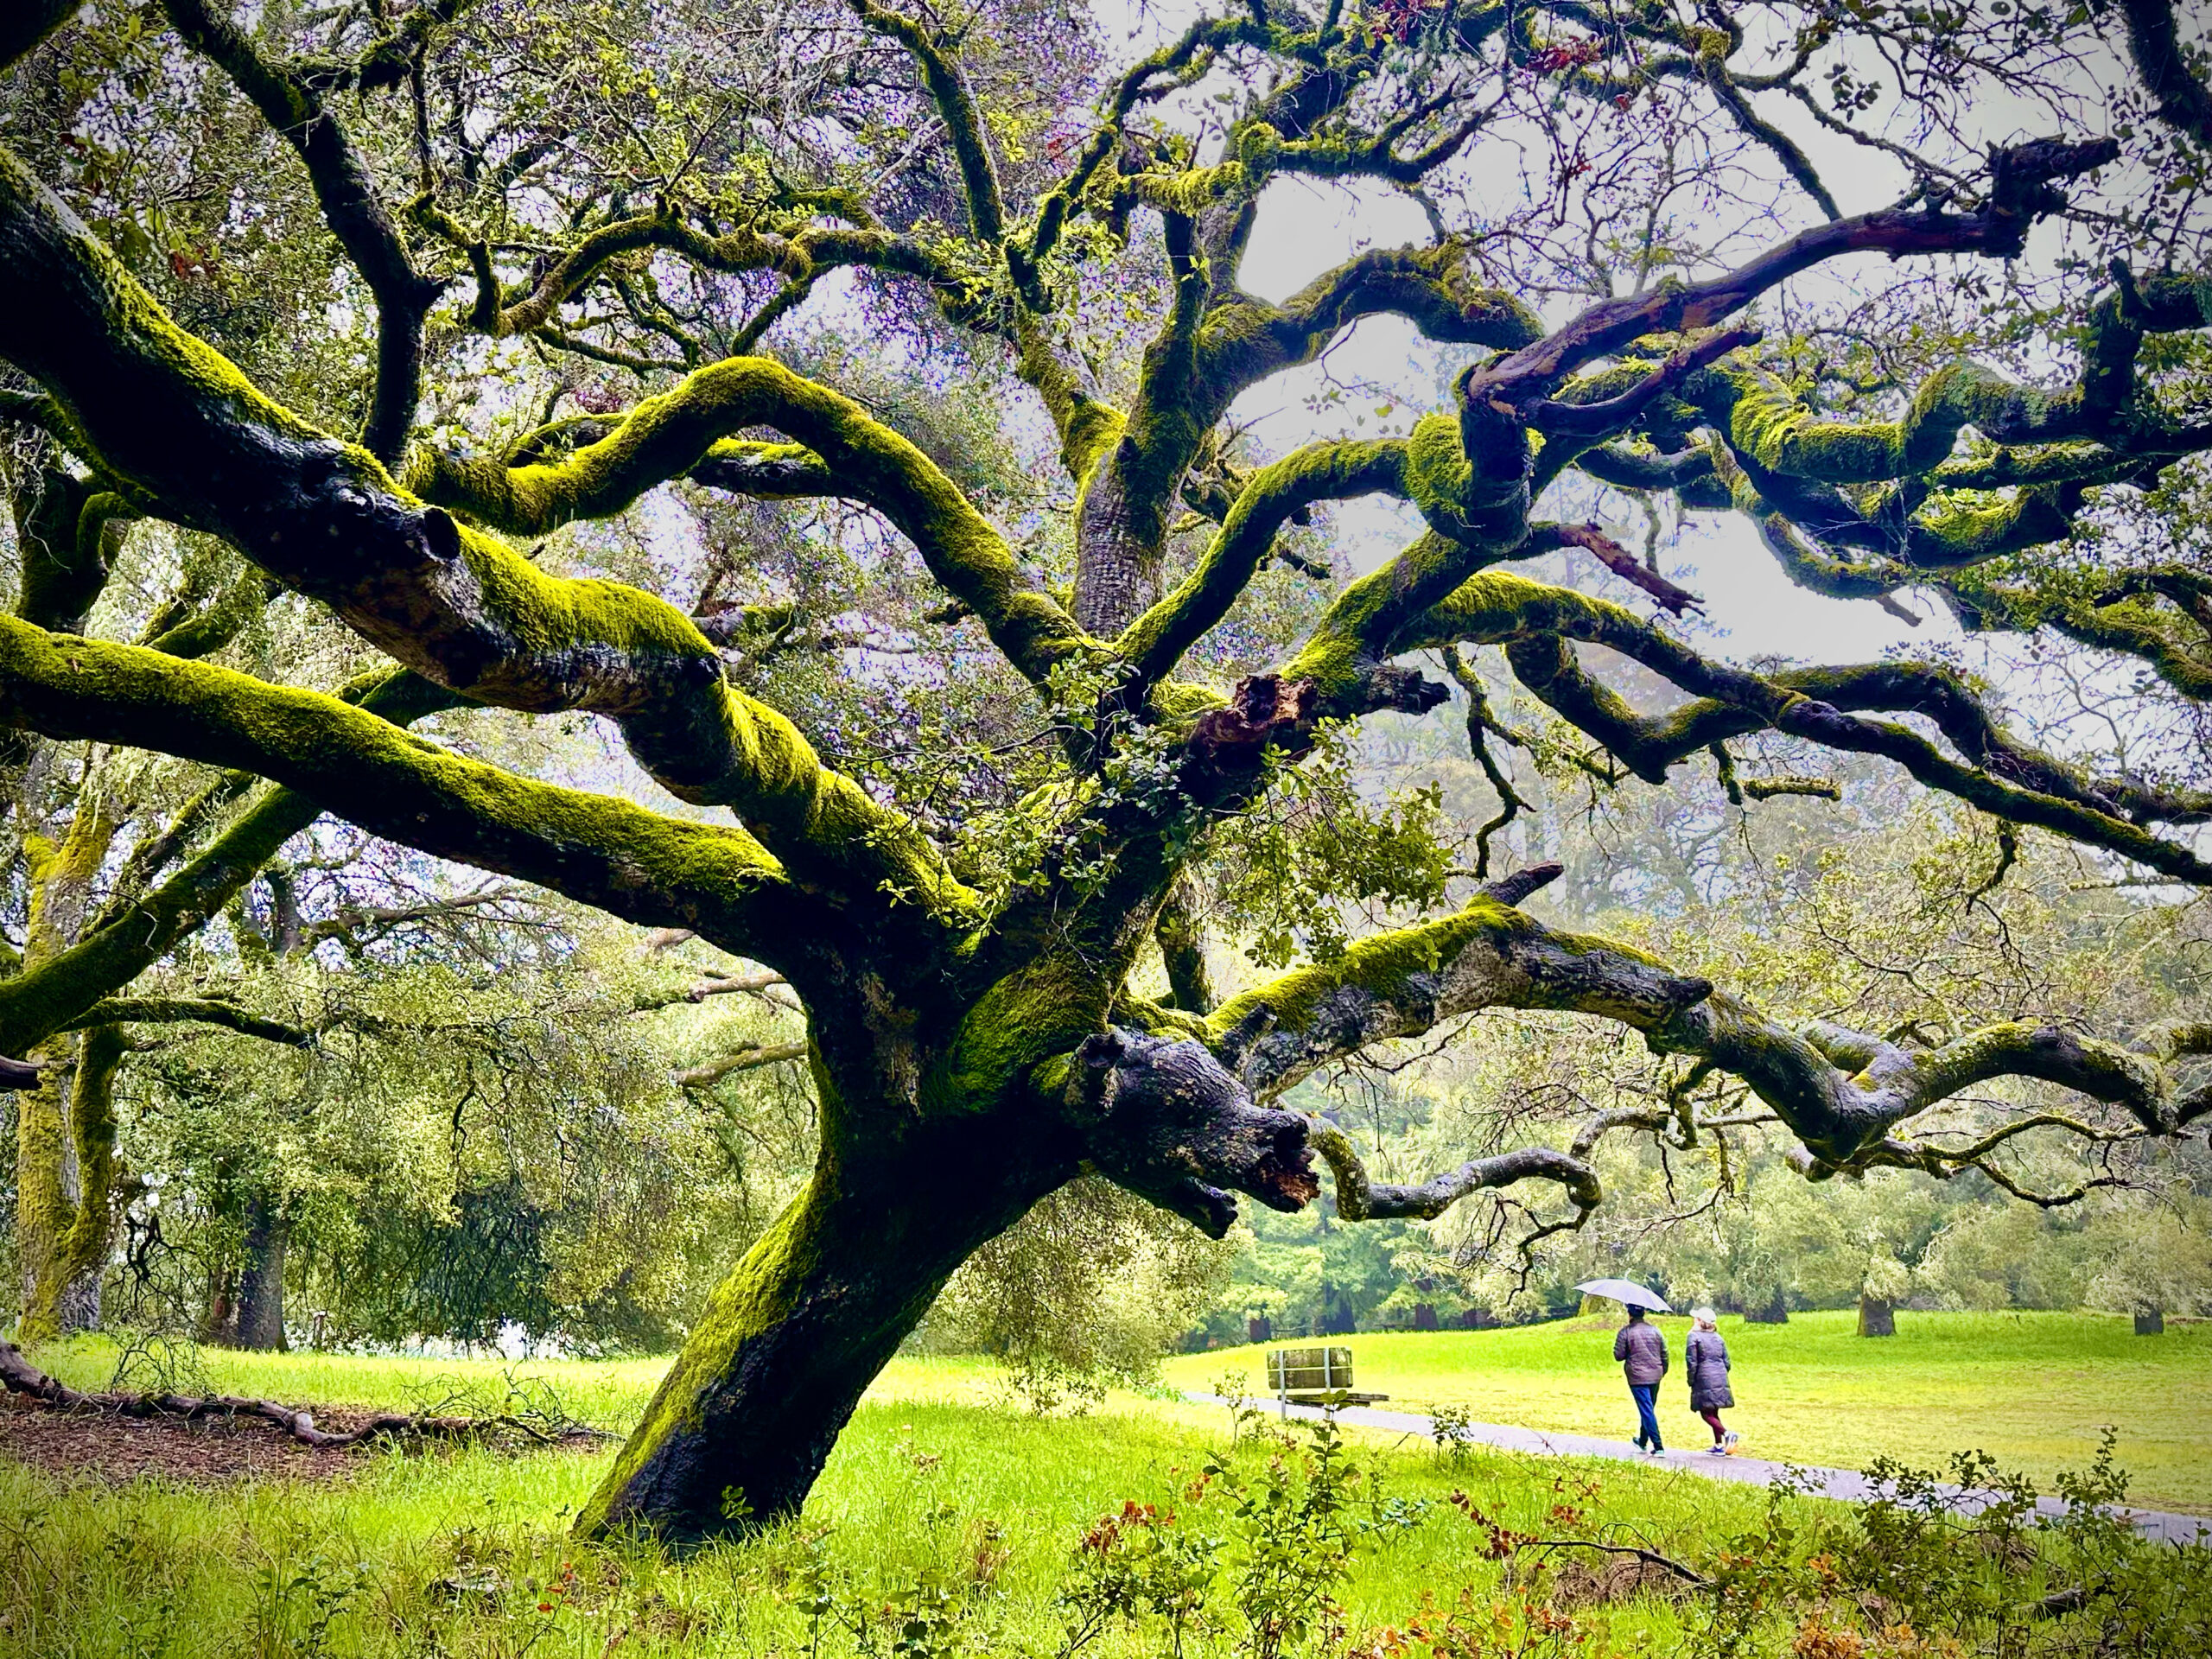 A large oak tree with moss growing on it.